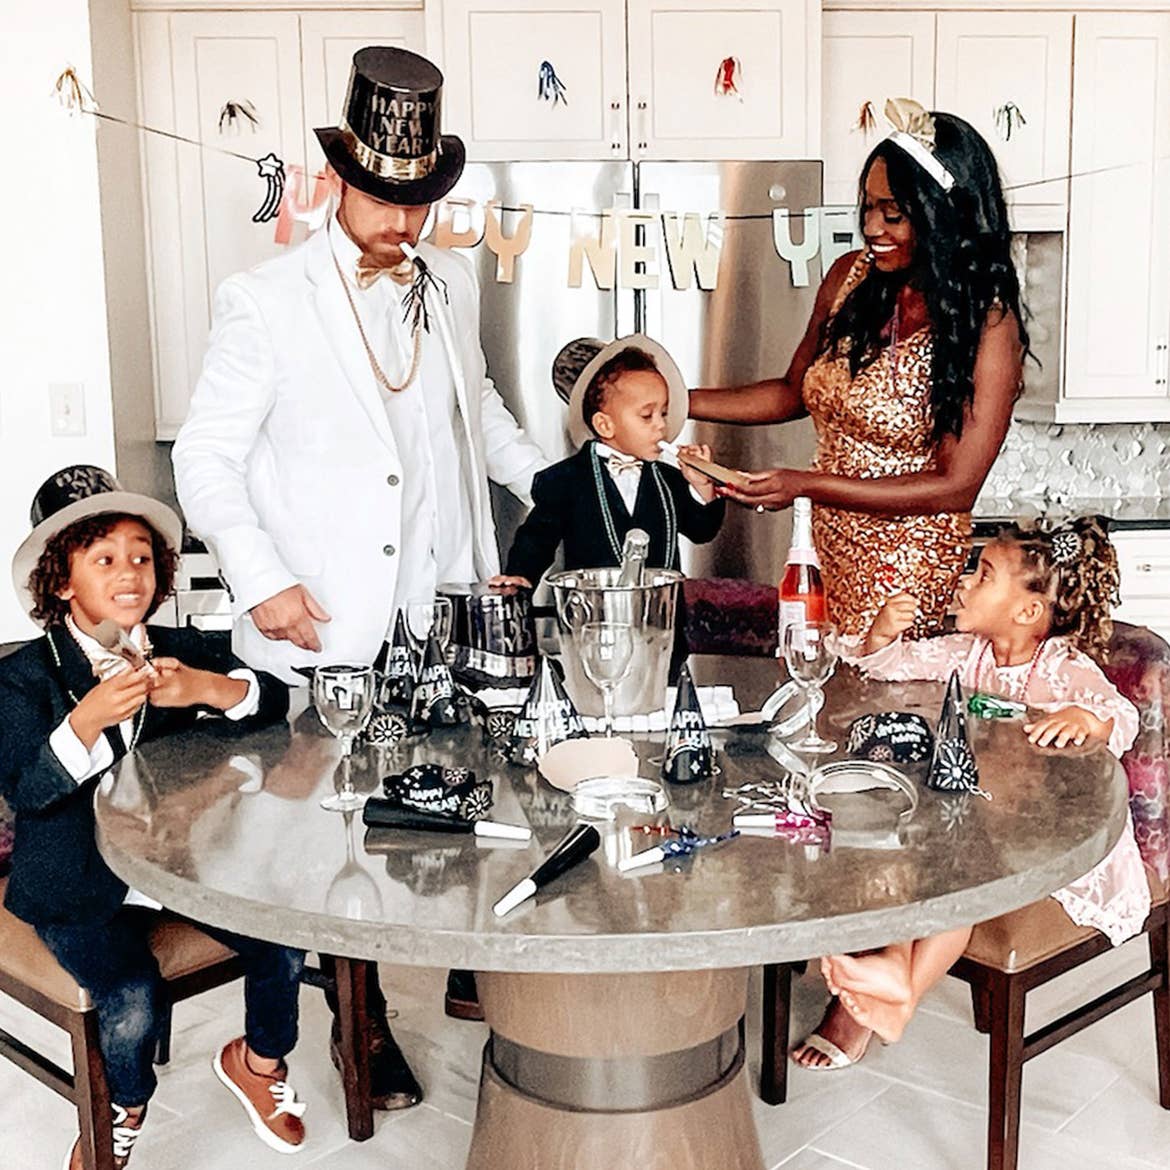 Sally Butan, of The Butan Clan, celebrates New Year's Eve with her family in a Signature Collection villa at New Orleans Resort in Louisiana.